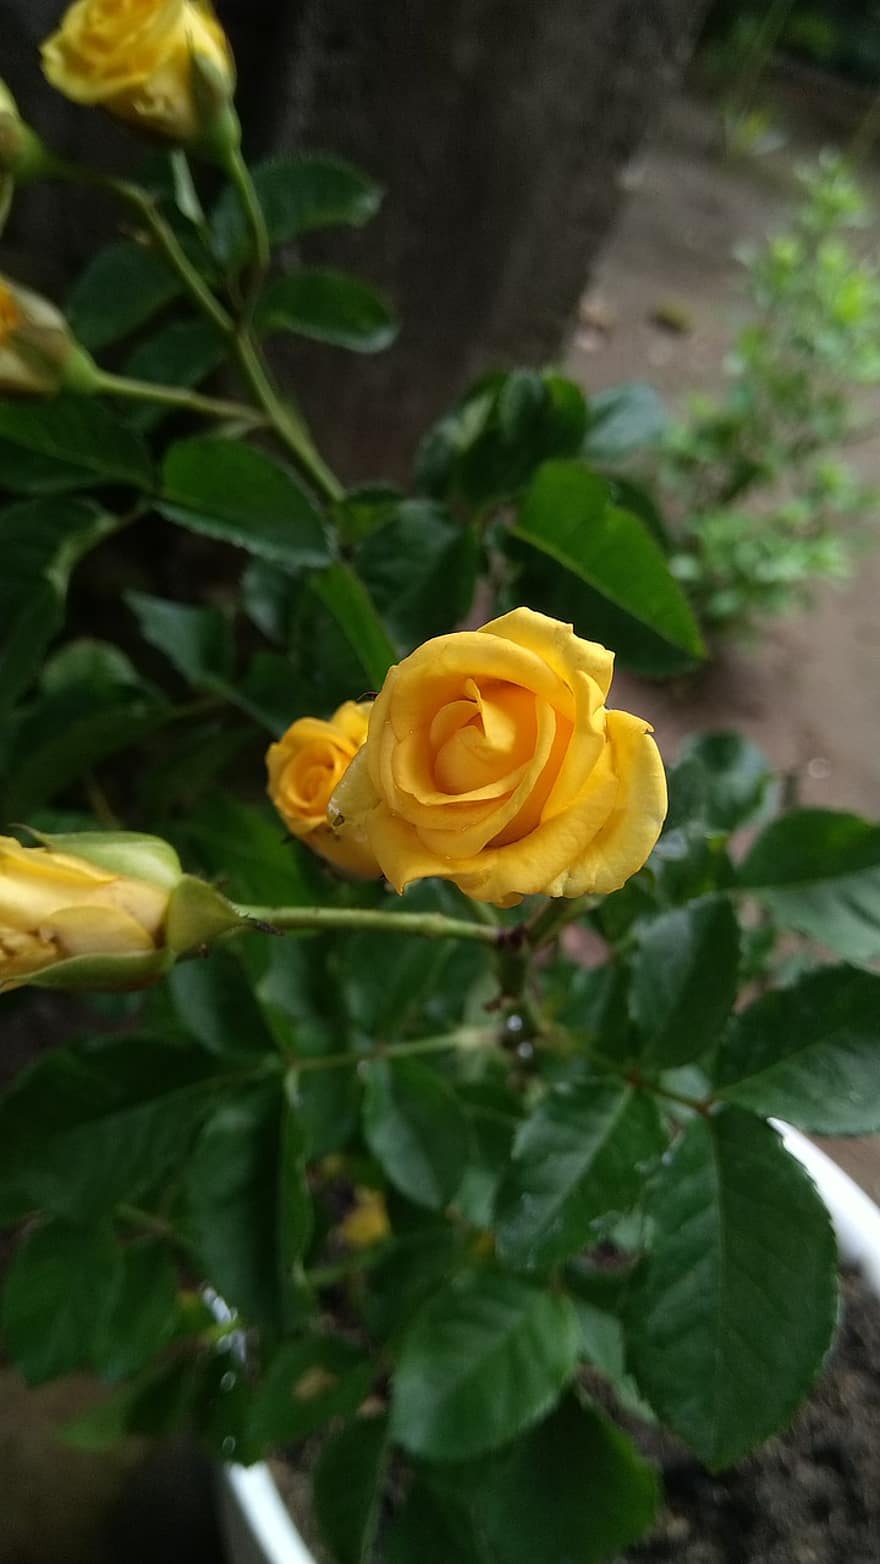 Flowers, Yellow Flowers, Yellow Roses, Roses, Plant, Garden, leaf, petal, close-up, flower, summer